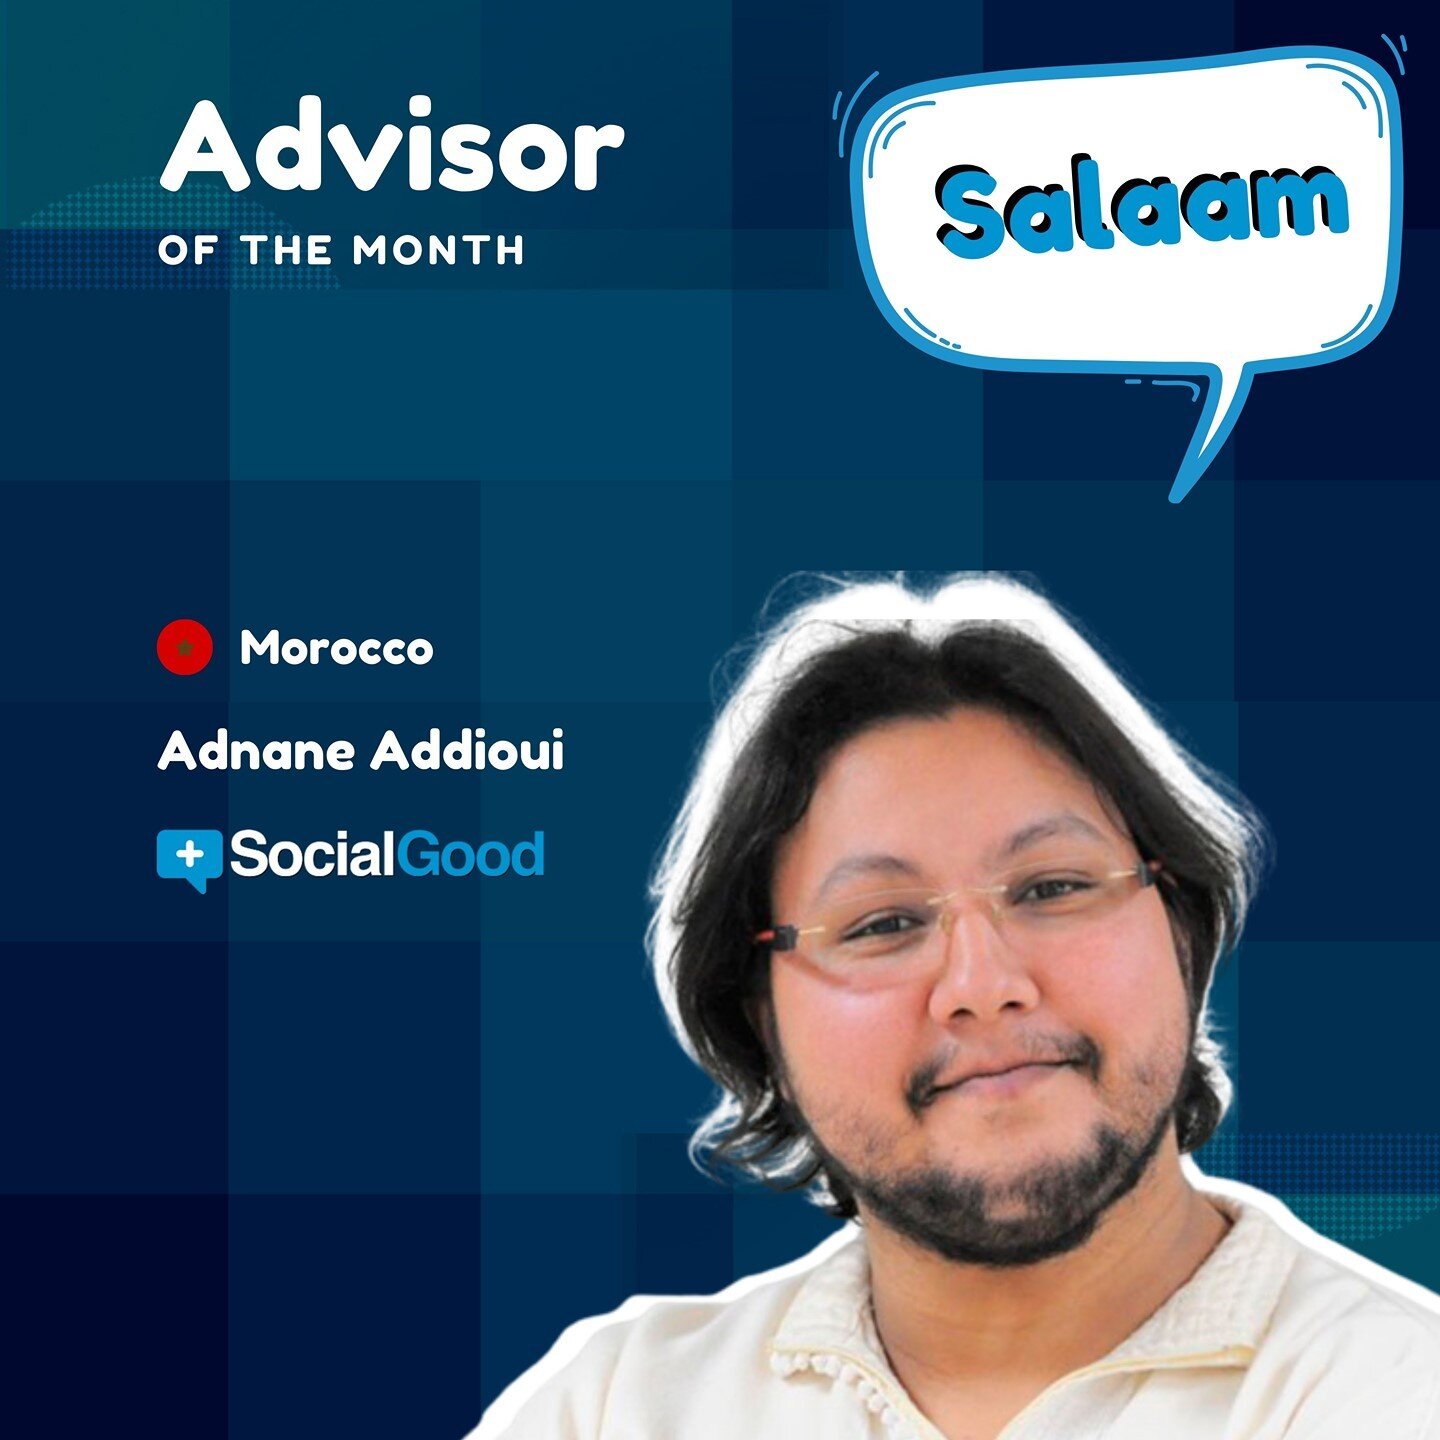 Meet our Advisor of the month, Adnane Addioui @adnanea

As a social commentator, aspiring social entrepreneur and disruptive-thinker, Adnane Addioui works in the MENA region, particularly in Morocco, to enable creative thinking, entrepreneurship and 